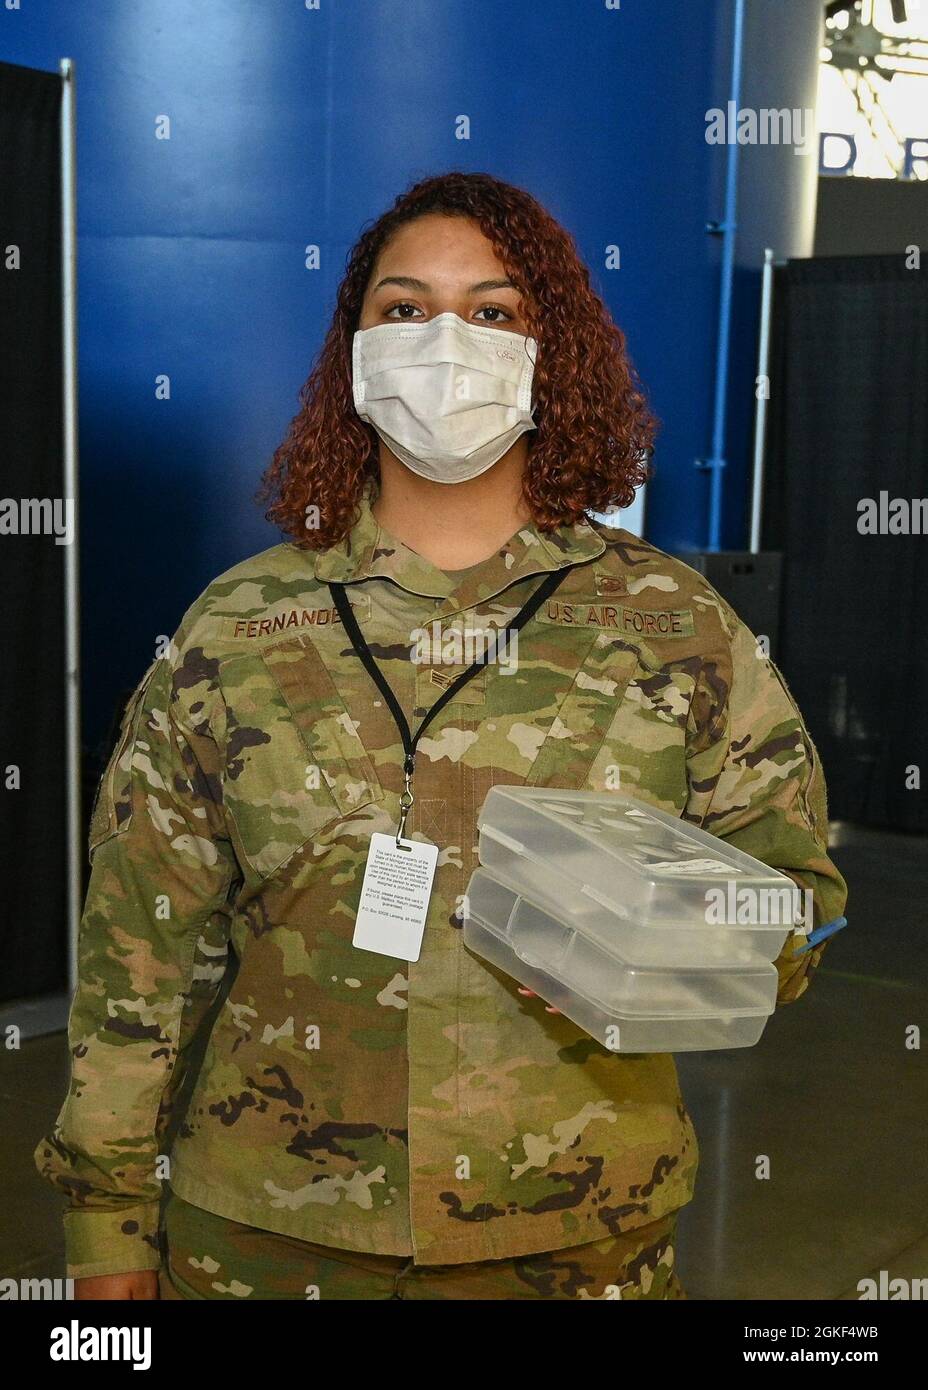 U.S. Air Force Senior Airman Amiee Fernandez, a Miami native and medical logistician with the 88th Medical Support Squadron, 88th Air Base Wing stationed at Wright-Patterson Air Force Base, Ohio, poses while waiting to deliver vaccines at the state-led, federally-supported Ford Field Community Vaccination Center in Detroit, April 6, 2021. Fernandez is part of a group of Airmen assigned to 1st Detachment, 64th Air Expeditionary Group who are assisting with the vaccination efforts. Her main responsibility is supporting the local community members by observing any reactions they may have after re Stock Photo